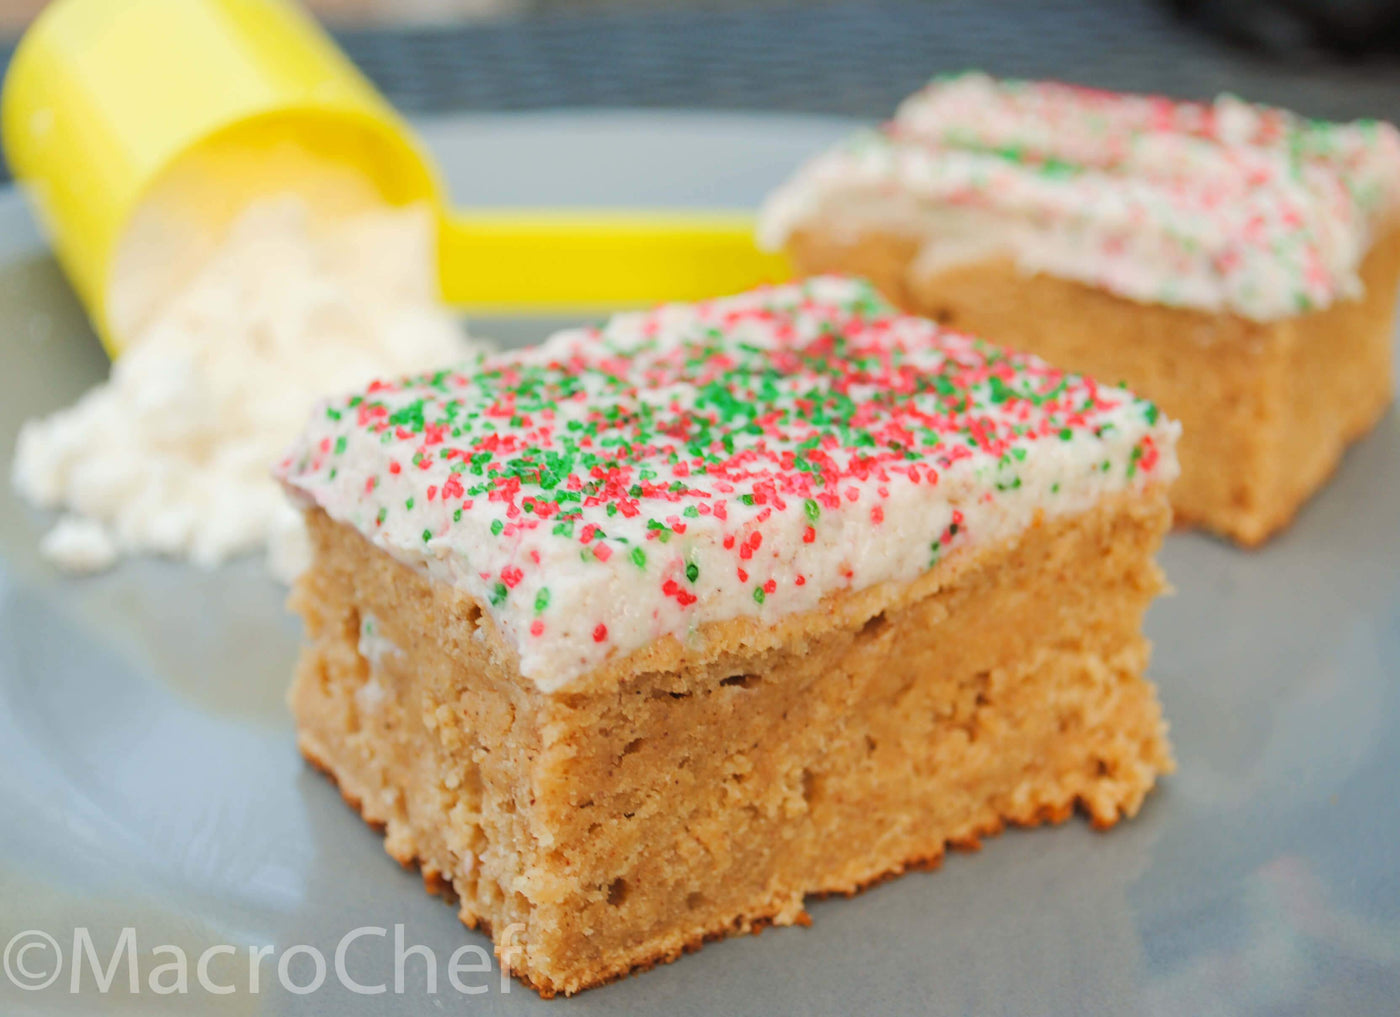 Frosted Gingerbread Protein Bar Recipe